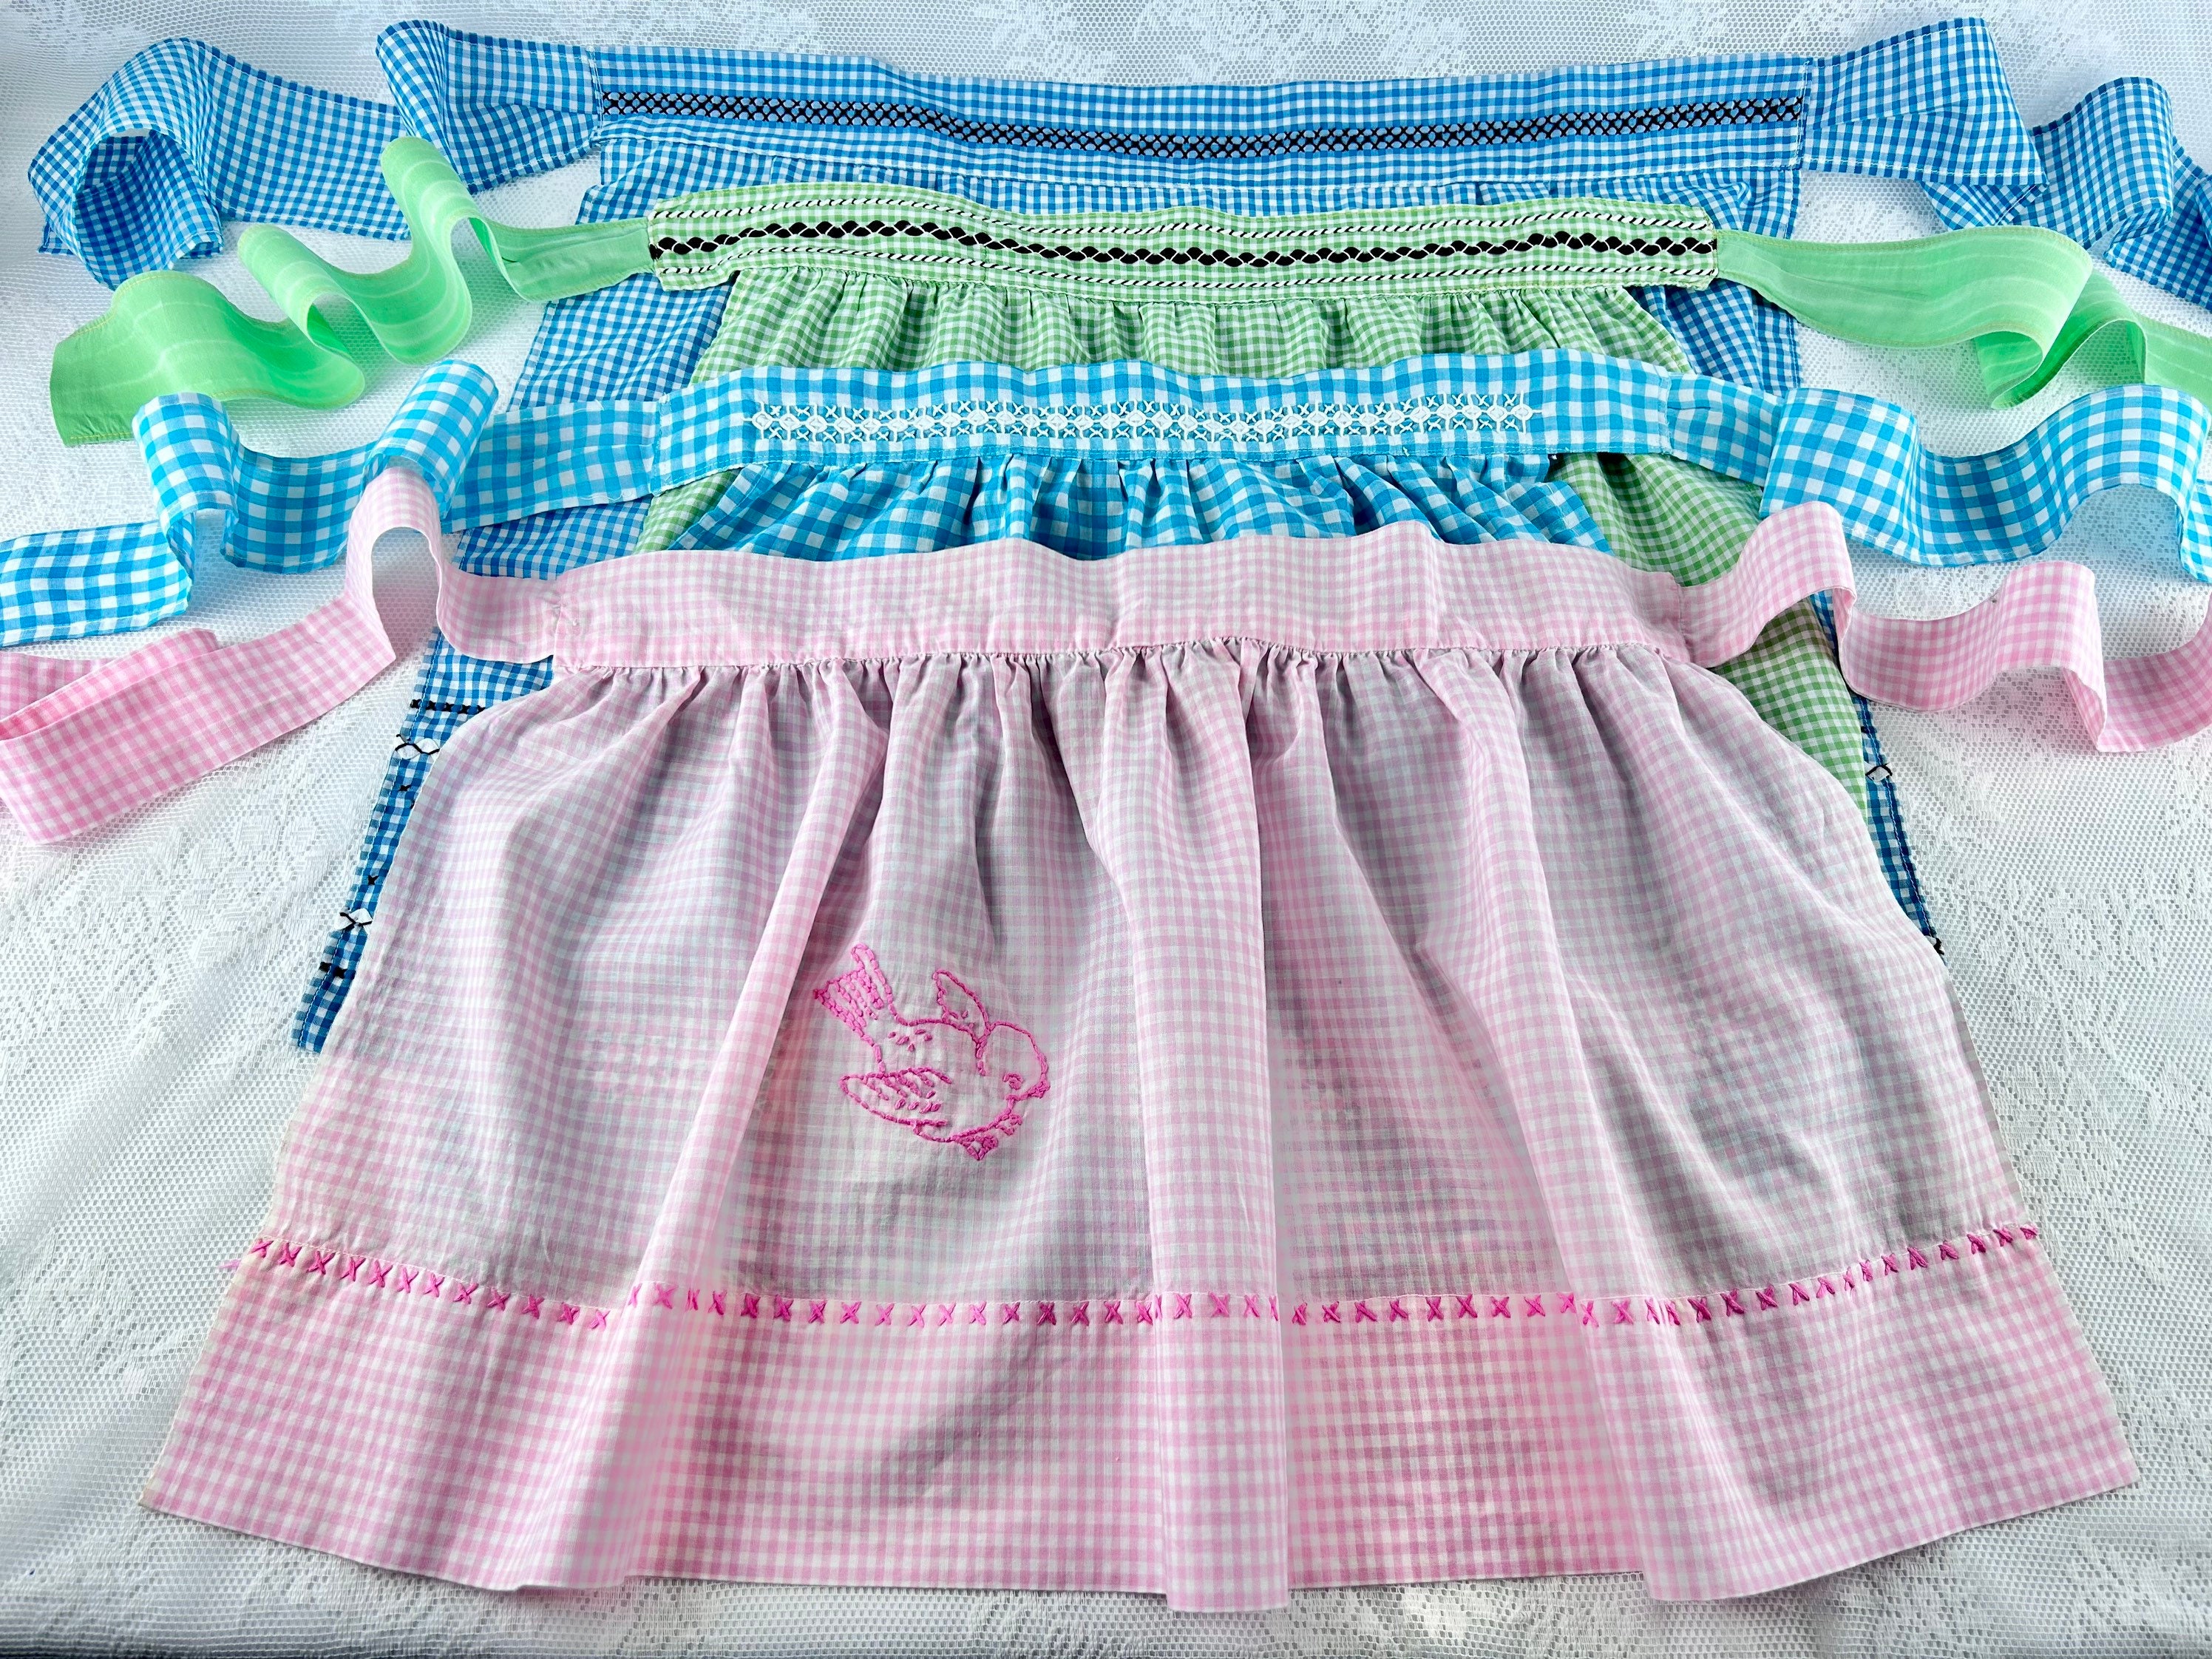 Pink Gingham Fabric -  Canada